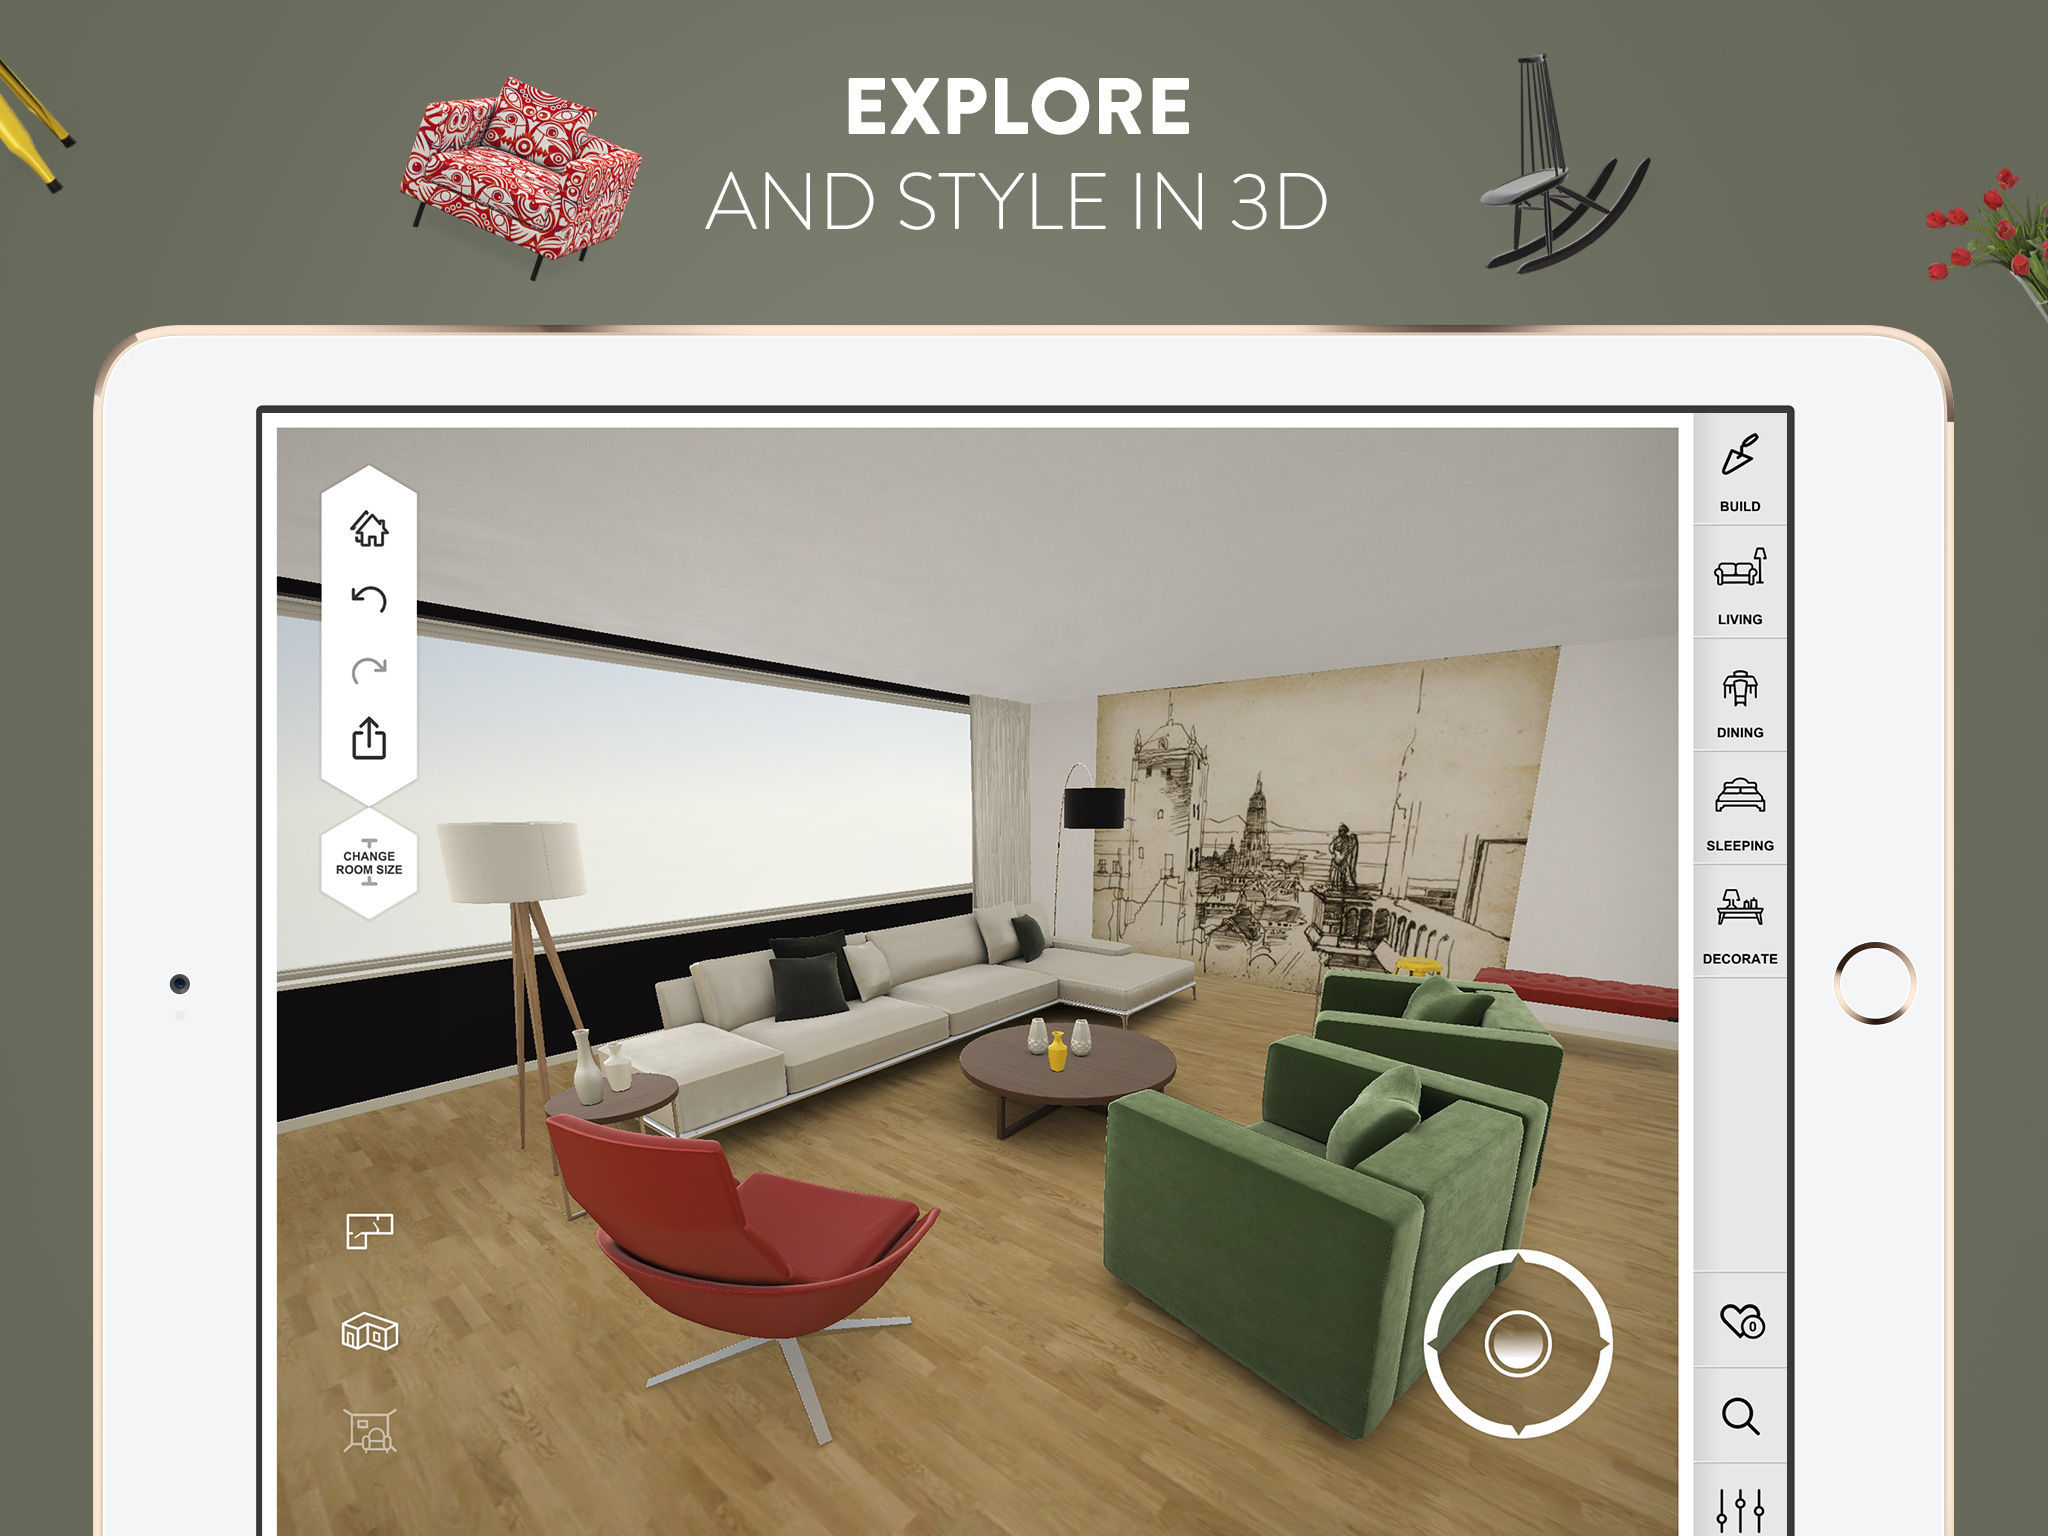 Answered The 20 Best Interior Design Apps for Smartphones